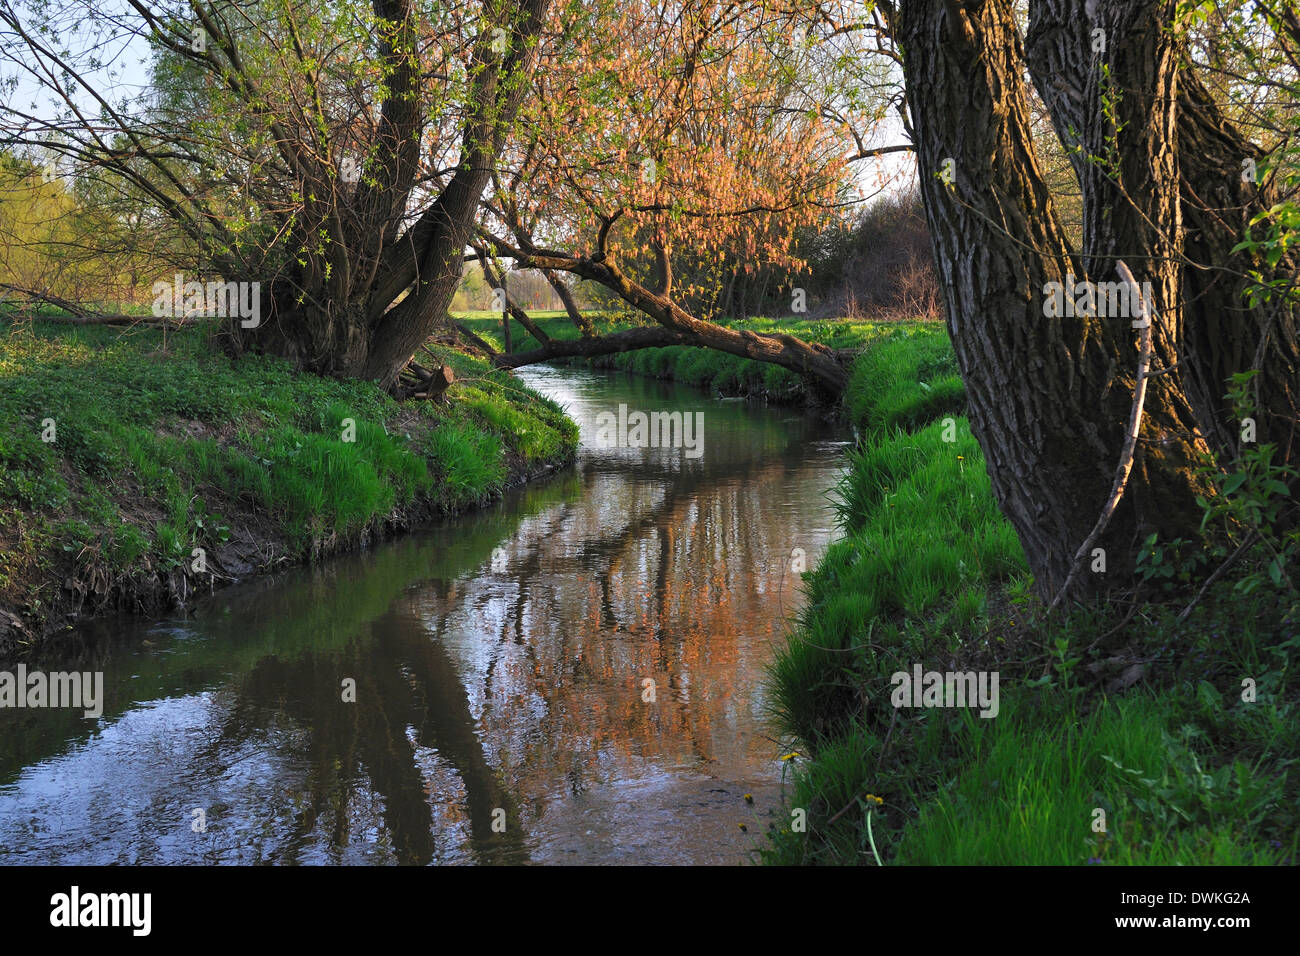 Landscape with River and Trees Stock Photo